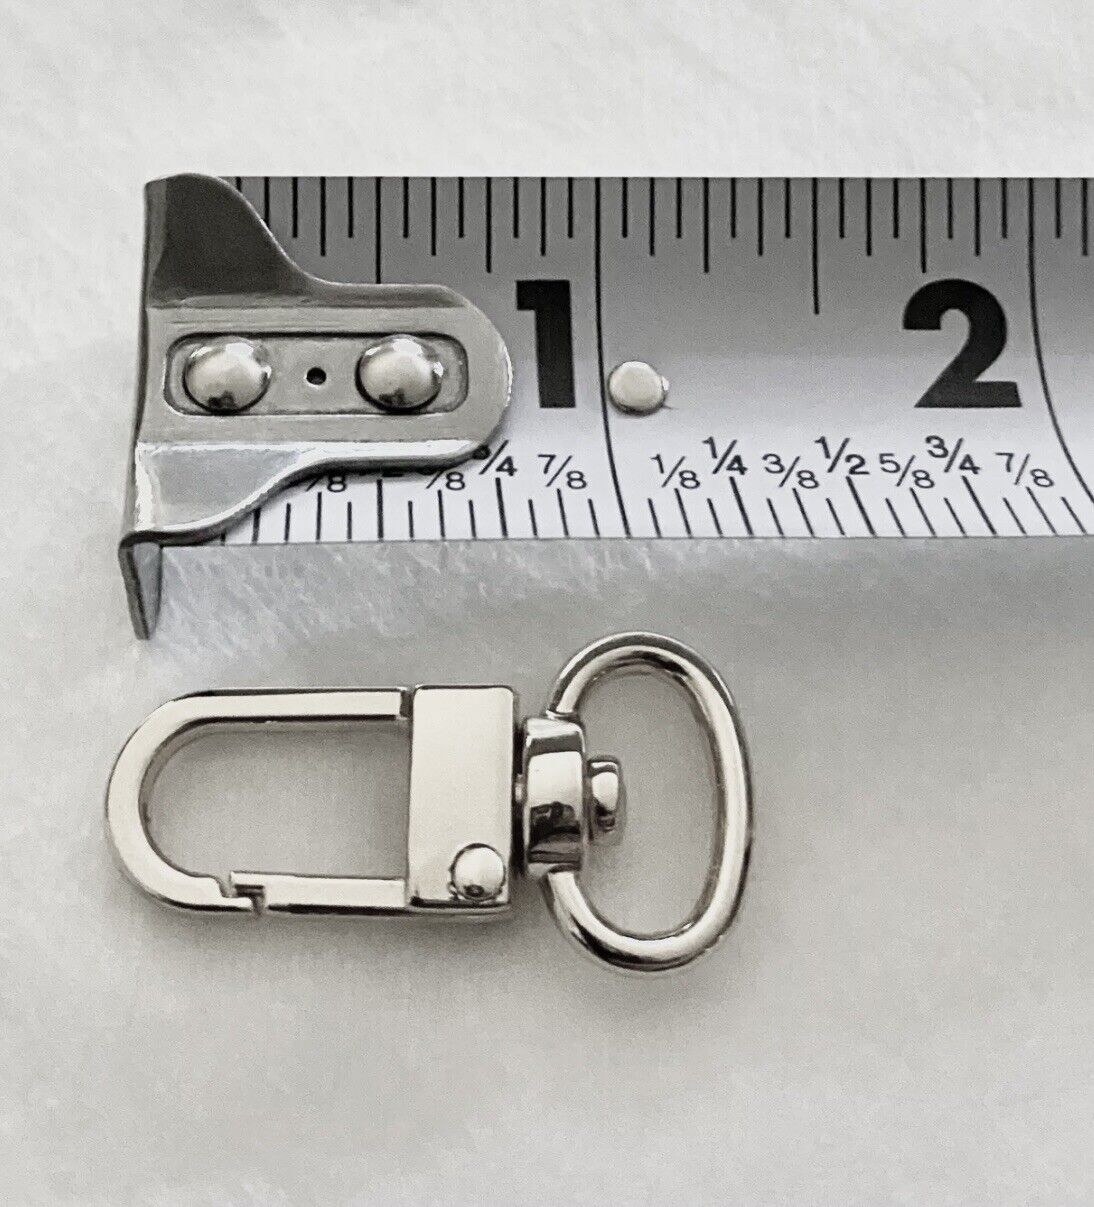 2X Silver Swivel Clasp Fits Louis Vuitton Name Tag Clip Key Charm Hook